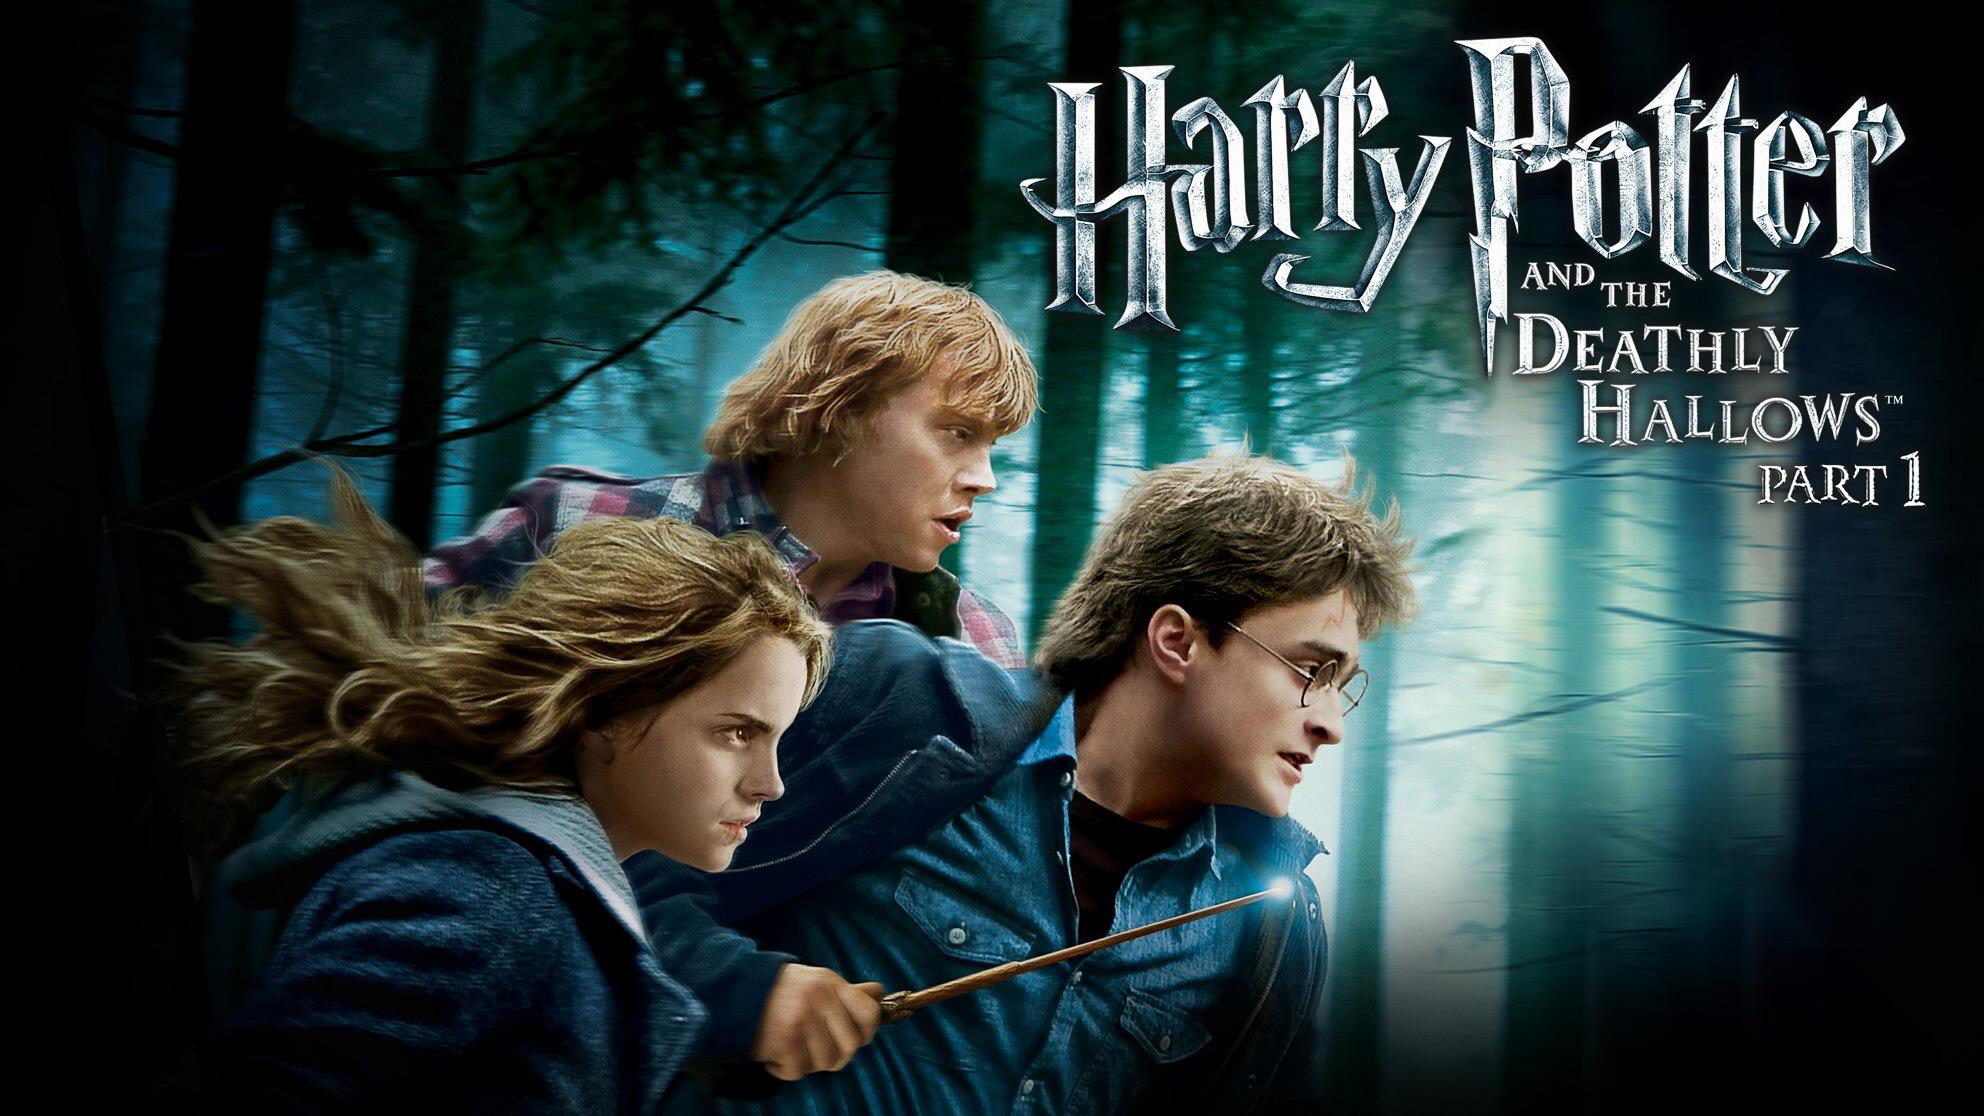 download free stream harry potter deathly hallows part 2